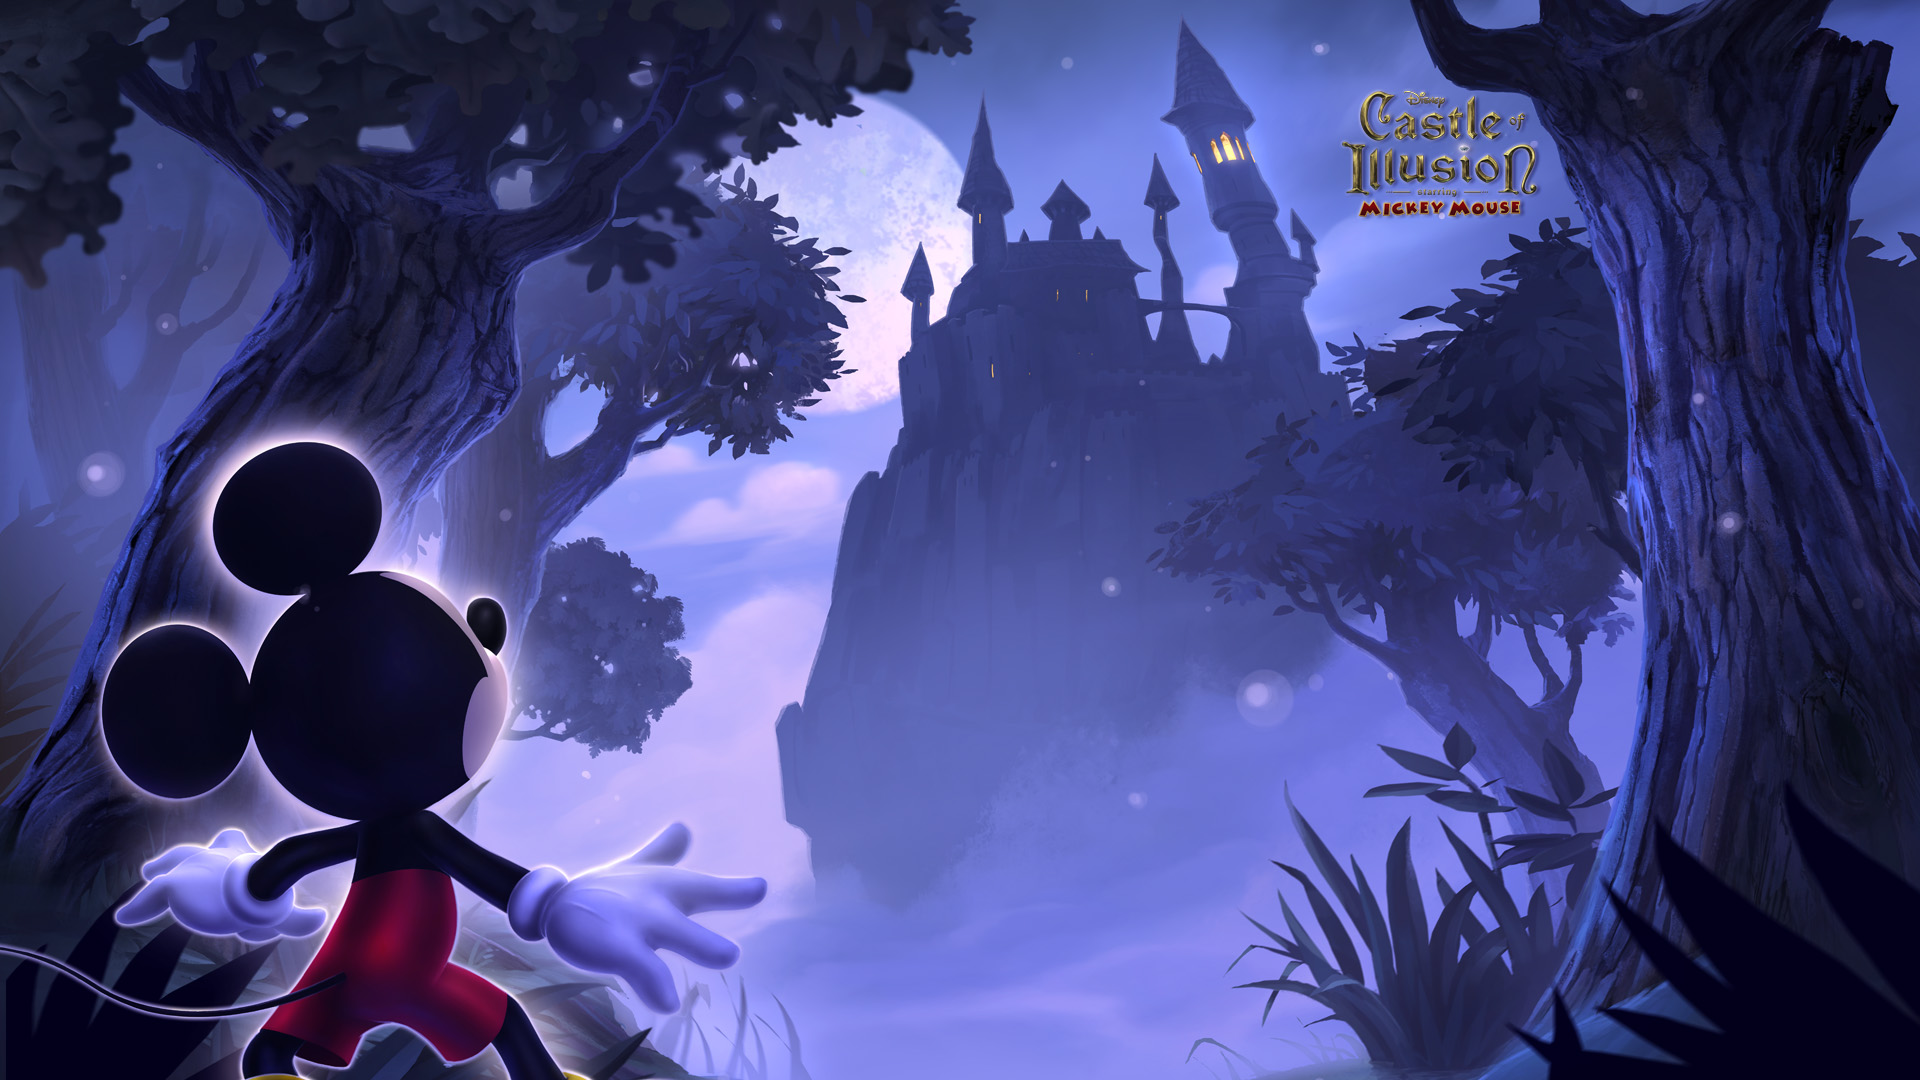 Castle Of Illusion Remastered Wallpaper for desktop devices